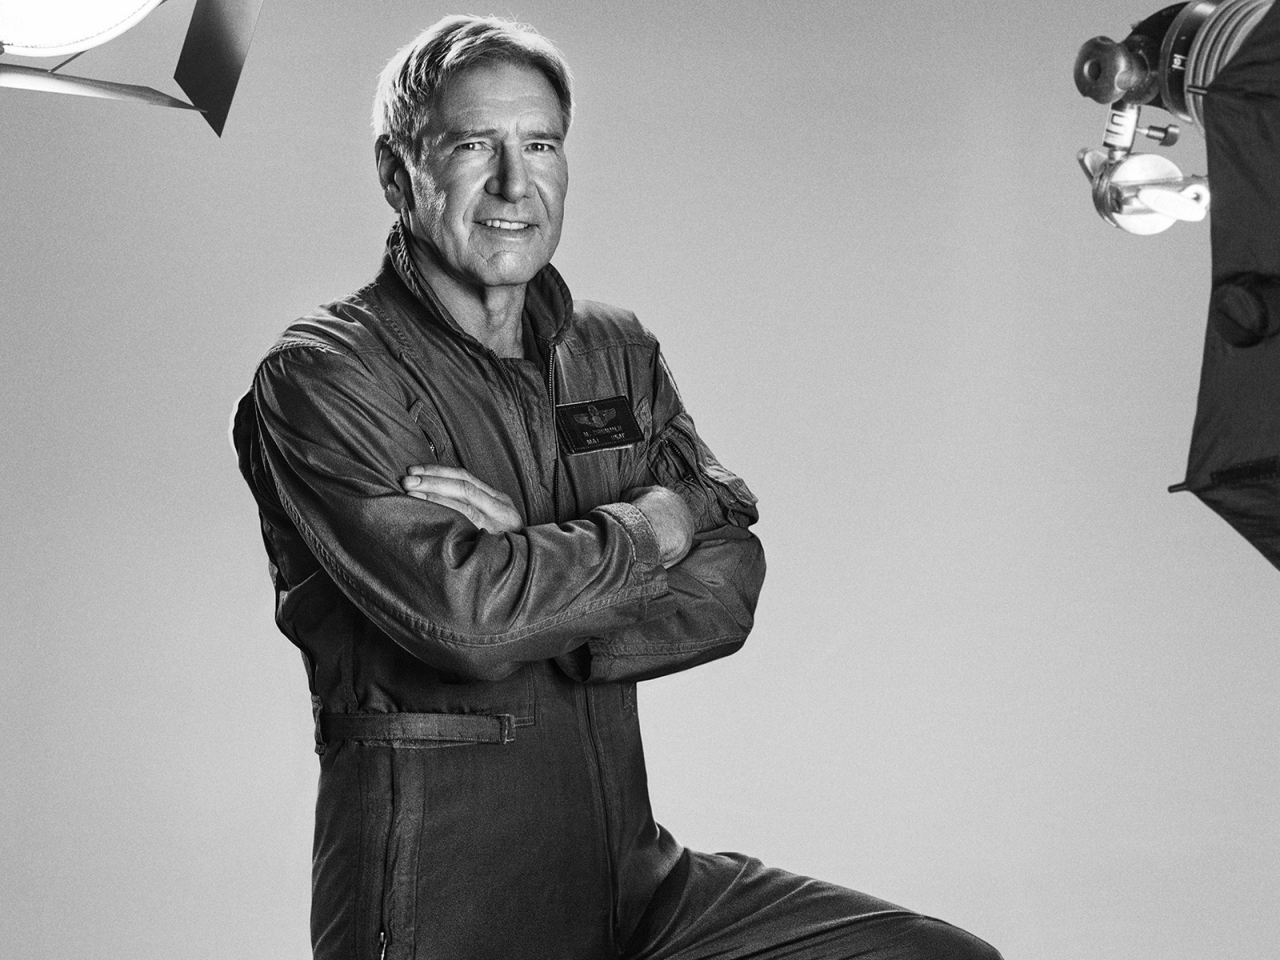 Harrison Ford The Expendables 3 for 1280 x 960 resolution